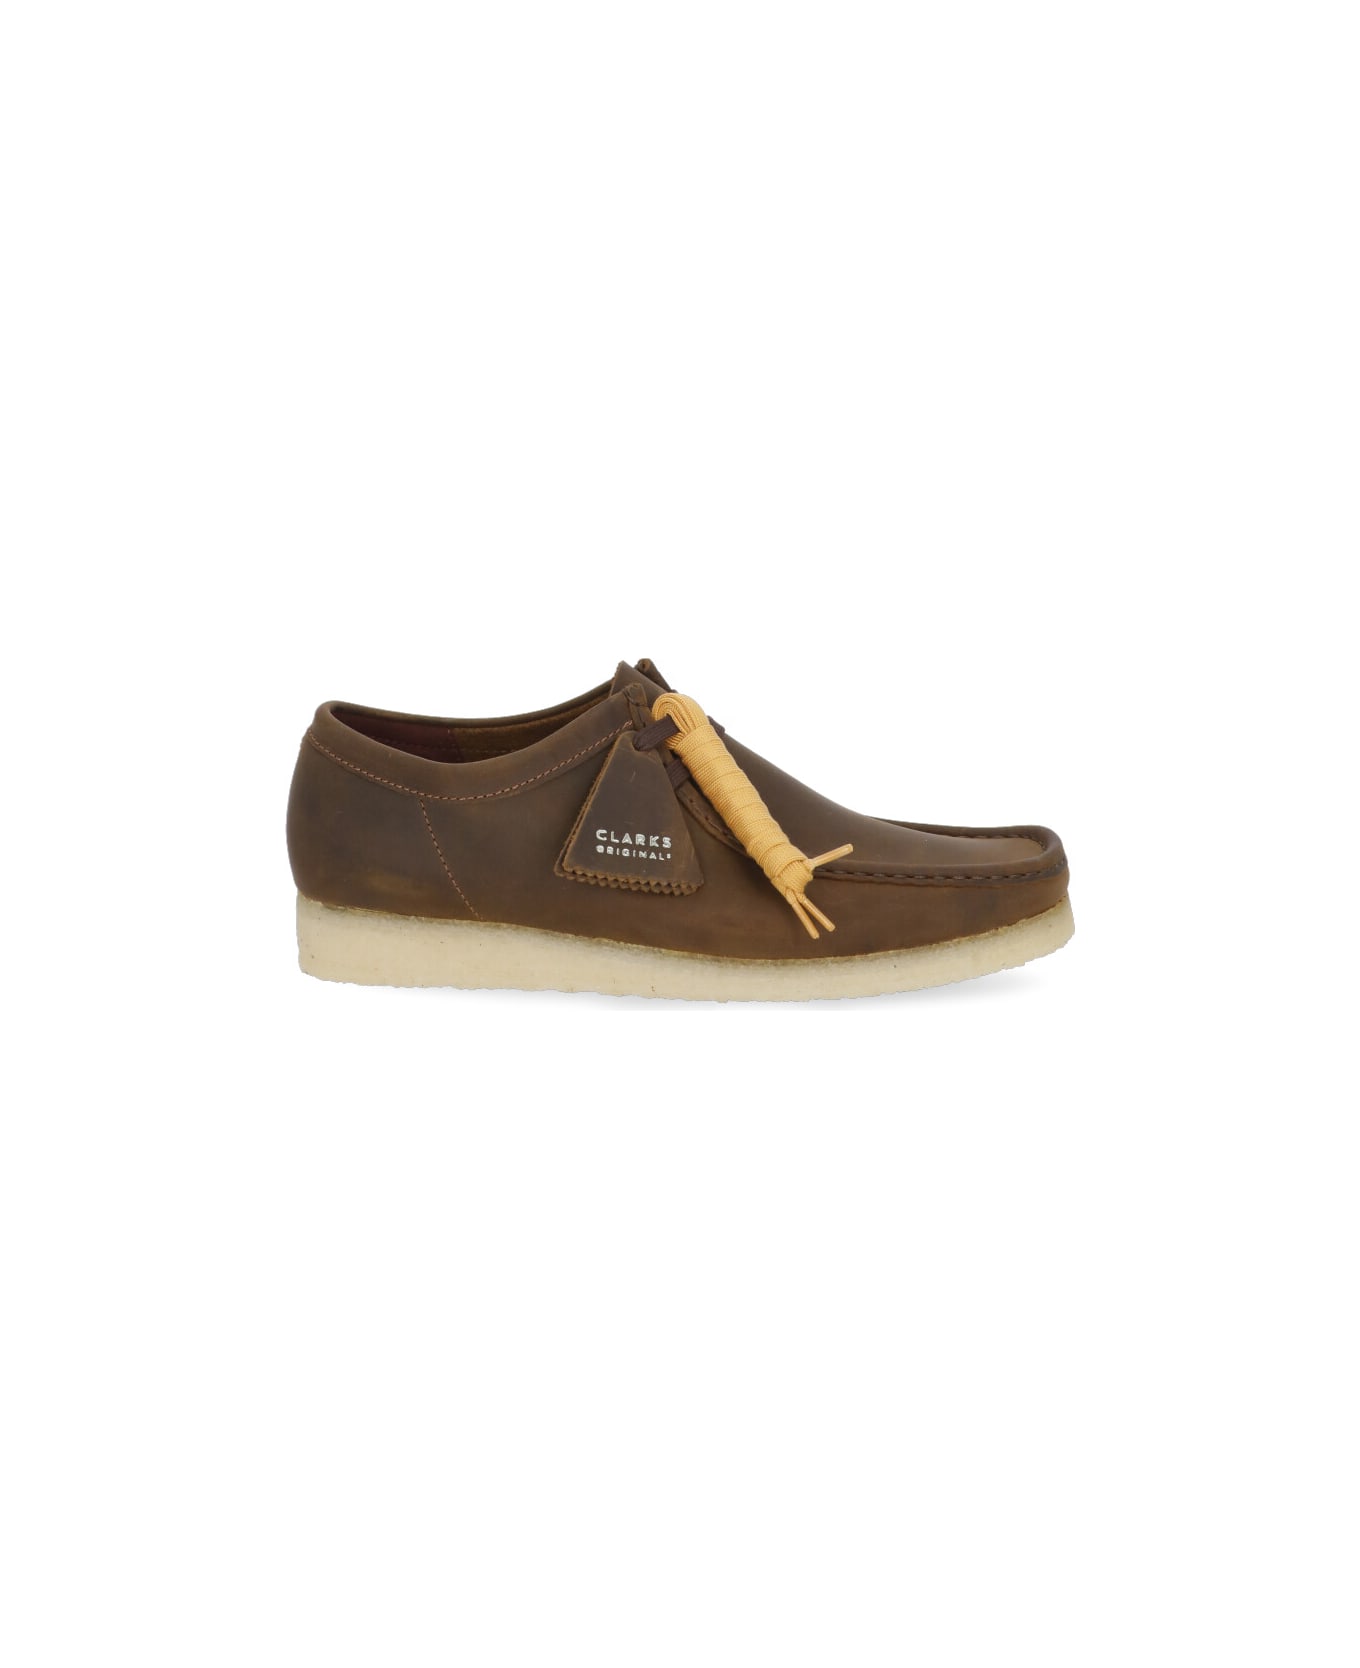 Clarks Wallabee Loafers - Brown